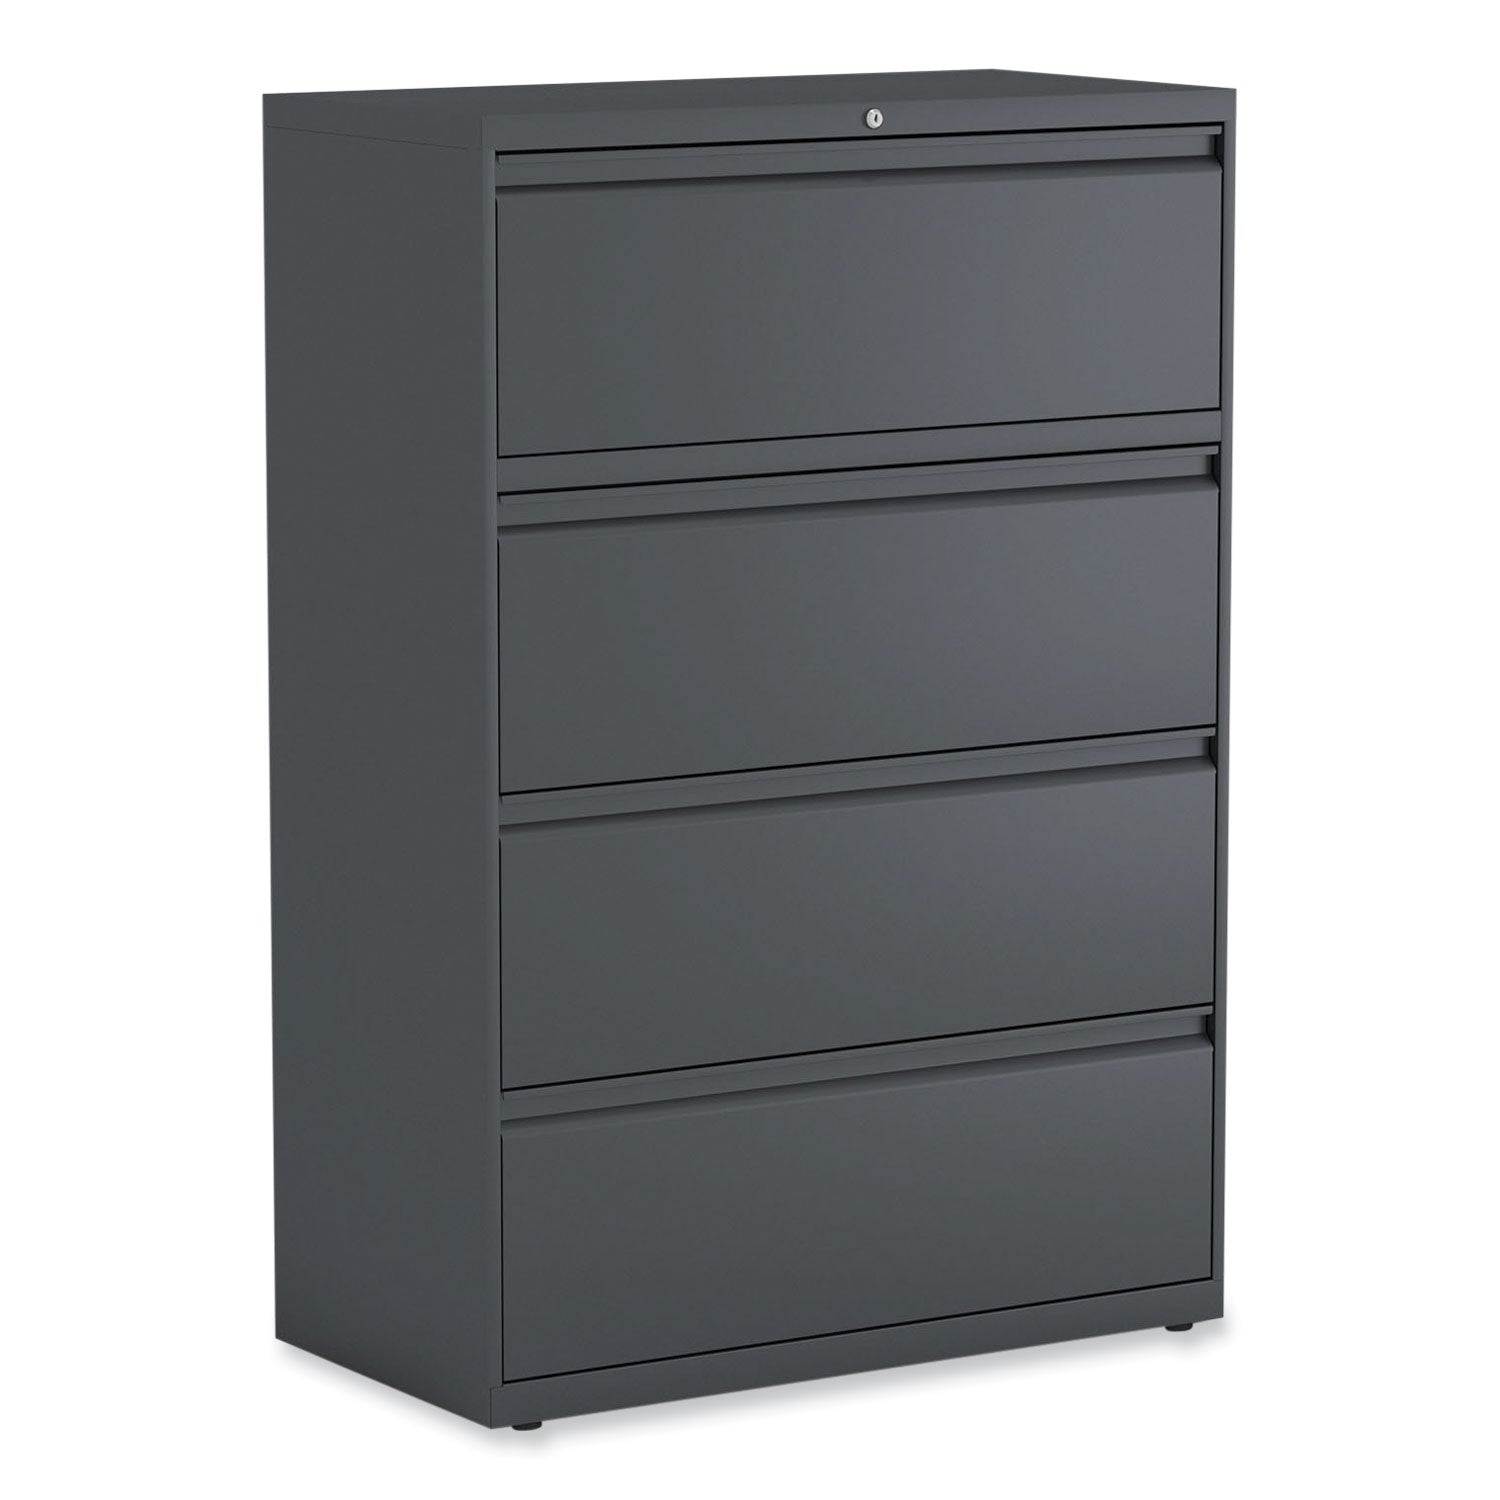 lateral-file-4-legal-letter-a4-a5-size-file-drawers-charcoal-36-x-1863-x-525_alehlf3654cc - 1